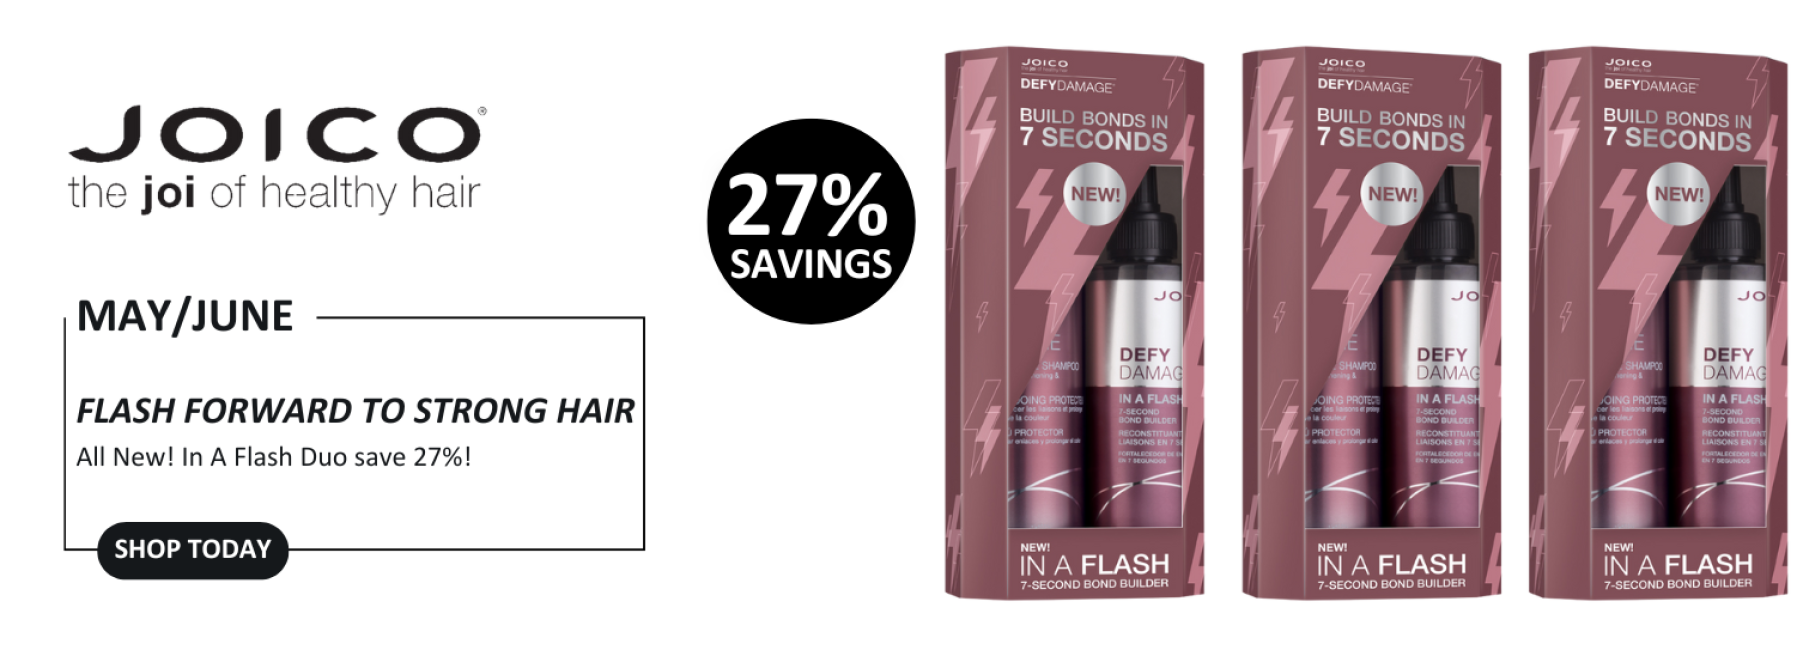 JOICO IN A FLASH DUO OFFER MAY